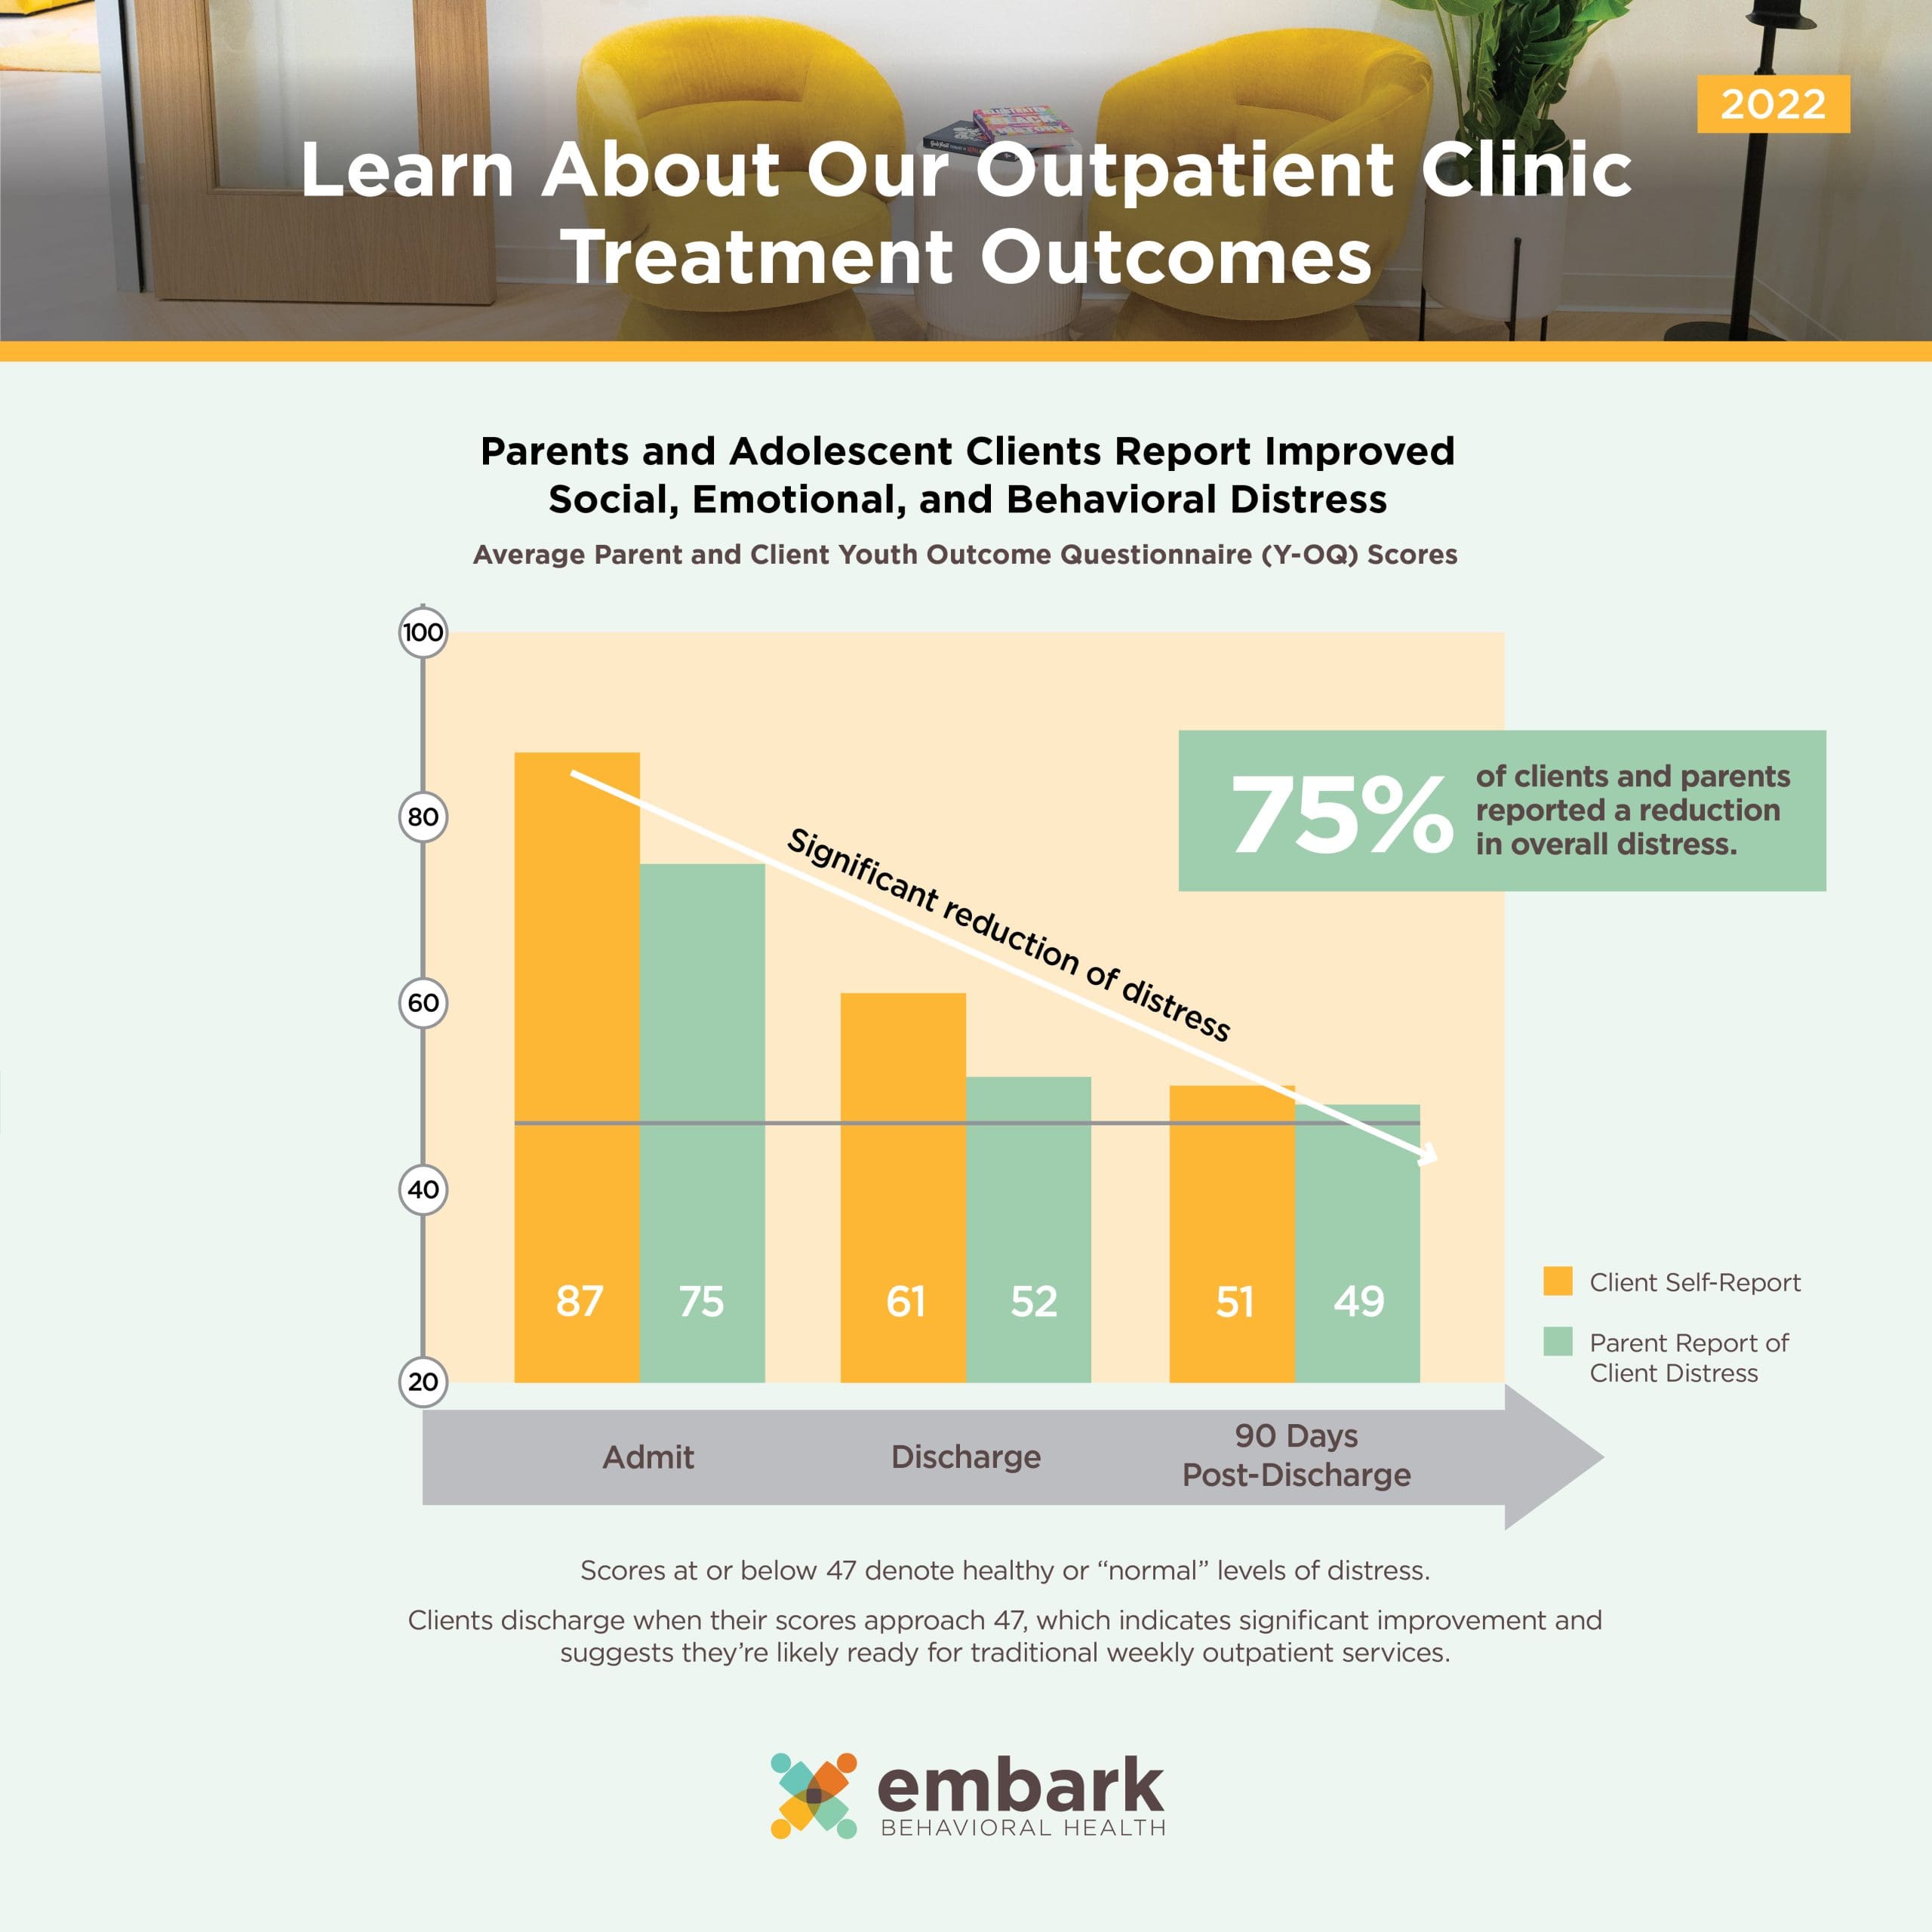 2303_EMB_One Pager - Clinics_1080x1080_v4